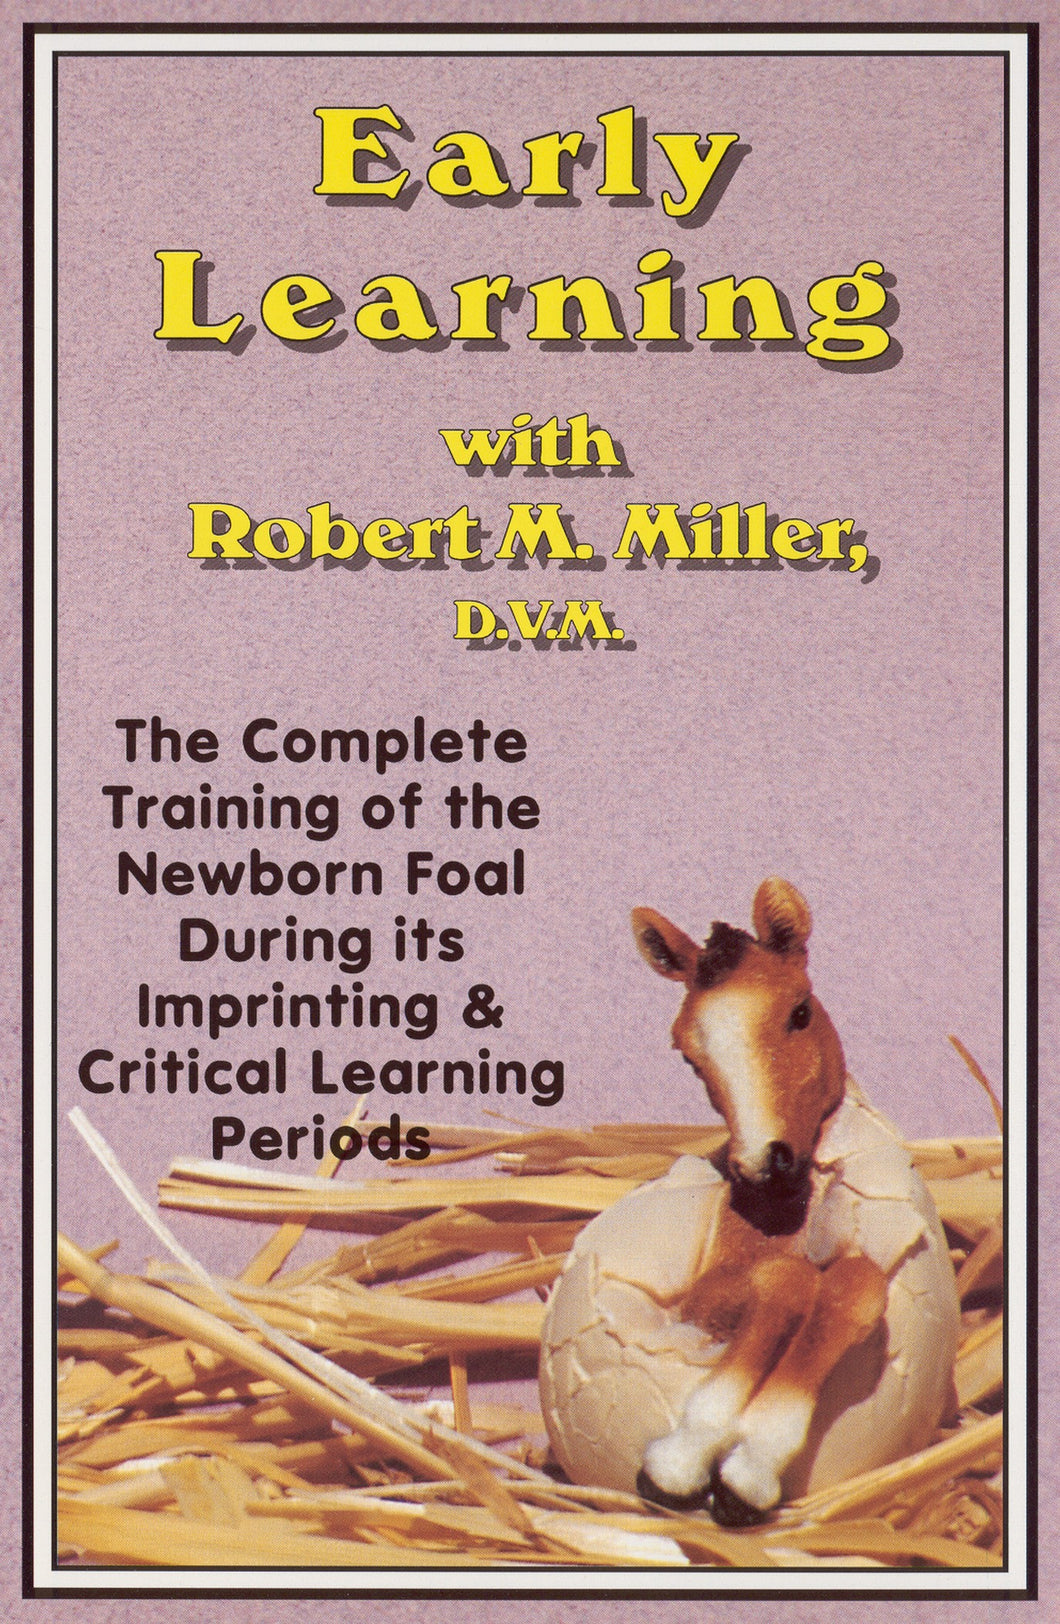 EARLY LEARNING - The Complete Training of the Newborn Foal During Its Imprinting & Critical Learning Periods on Video DVD